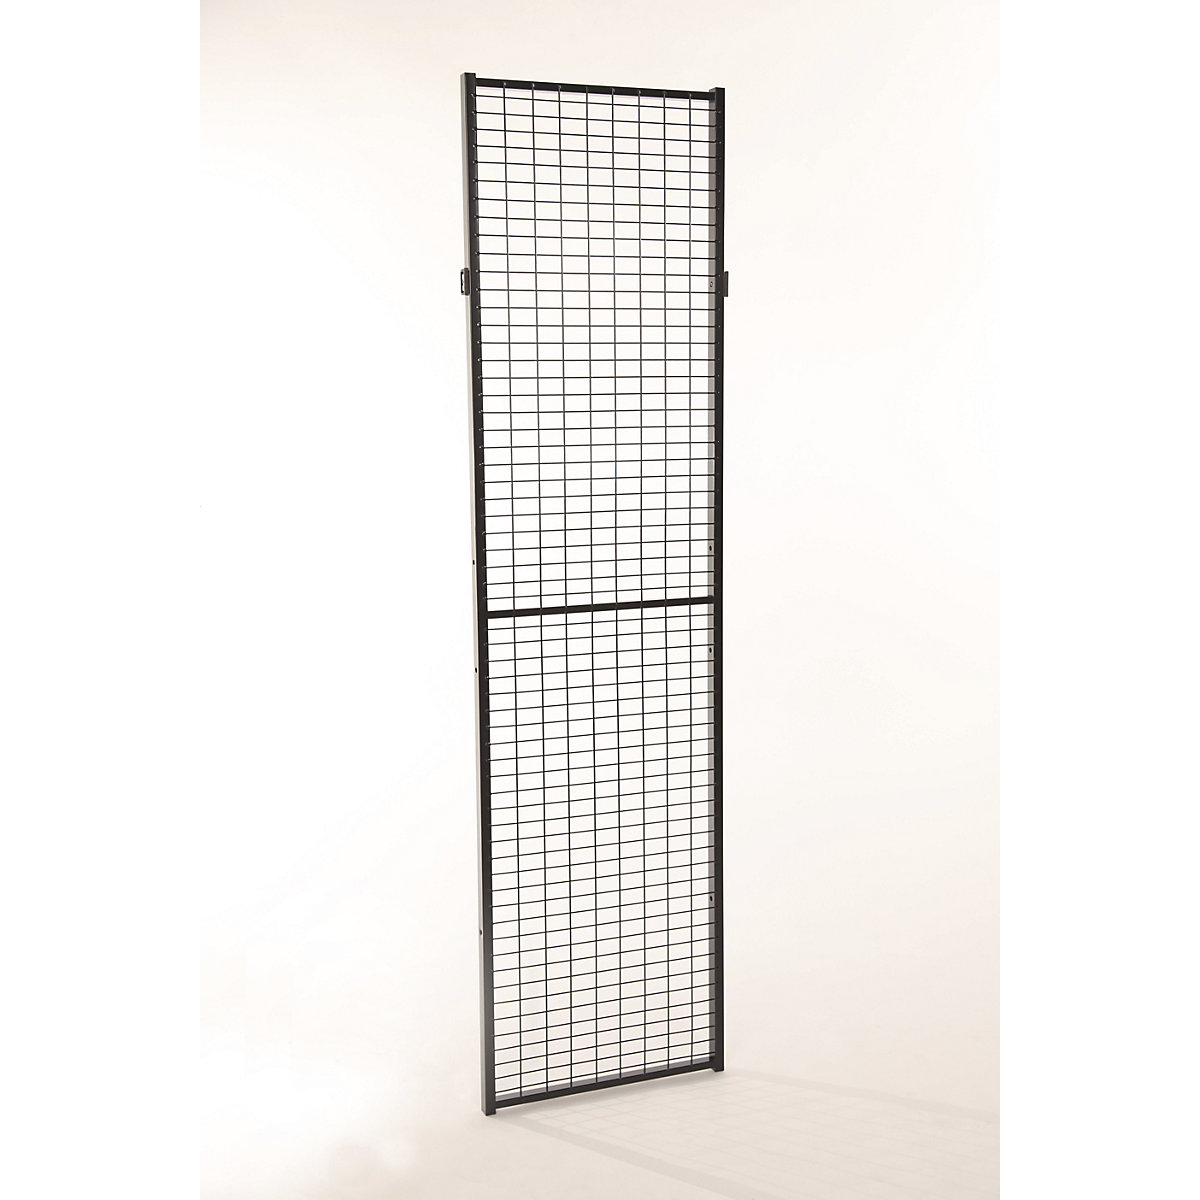 Axelent – X-GUARD CLASSIC machine protective fencing, wall section, height 1900 mm, width 250 mm